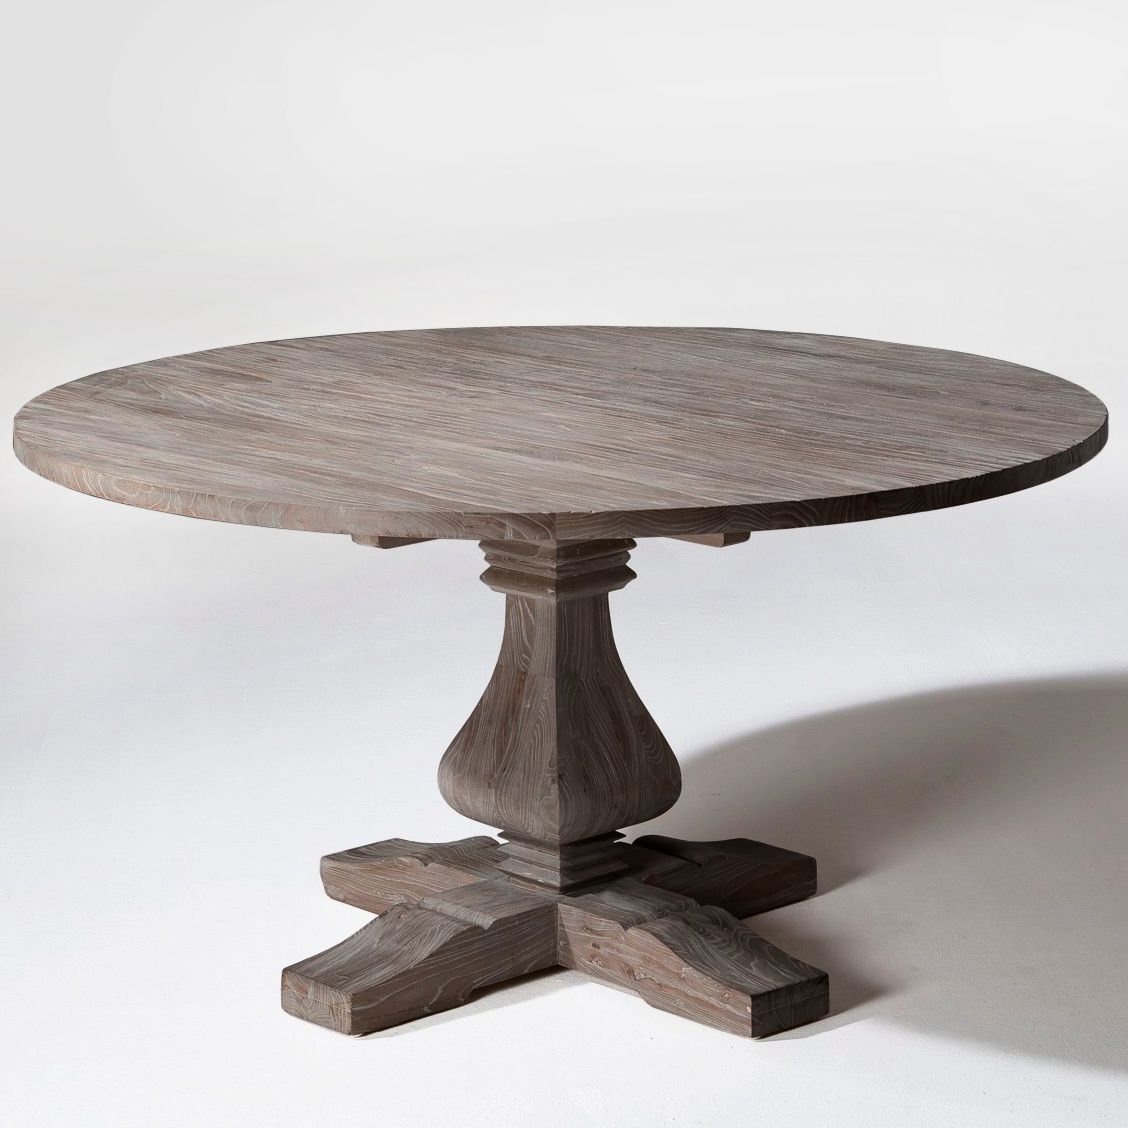 Round Wood Dining Table And Its Benefits – Home Decor Ideas In Fashionable Small Round Dining Tables With Reclaimed Wood (View 8 of 30)